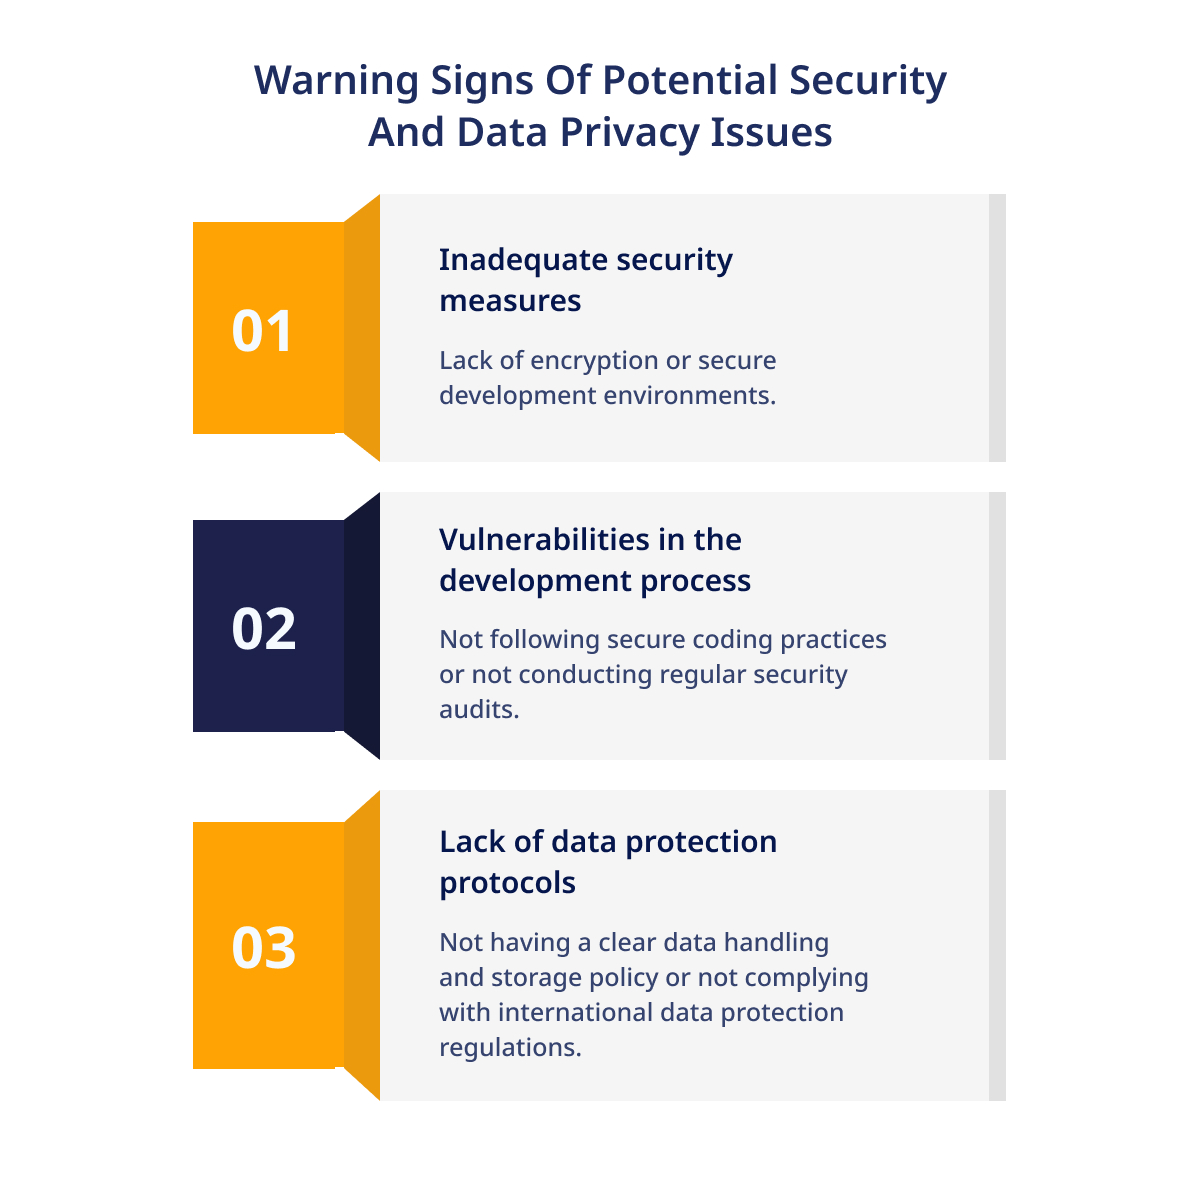 Warning Signs of Potential Security and Data Privacy Issues